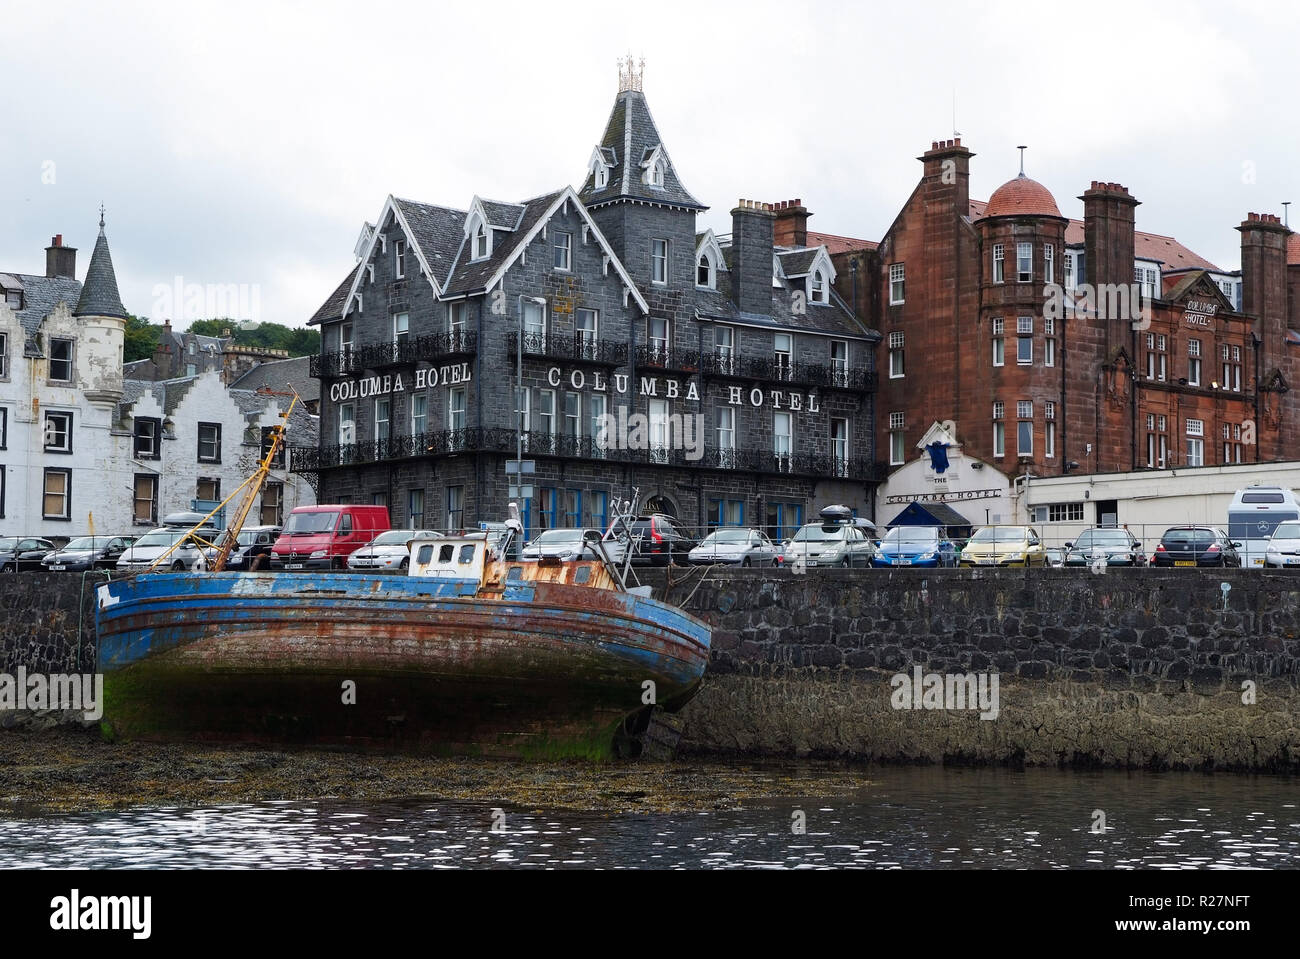 Oban, United Kingdom - February 20, 2010: shipwreck and city architecture along sea quay. Bay with houses on grey sky. Resort town with hotels. Summer vacation on island. Travelling and wanderlust. Stock Photo